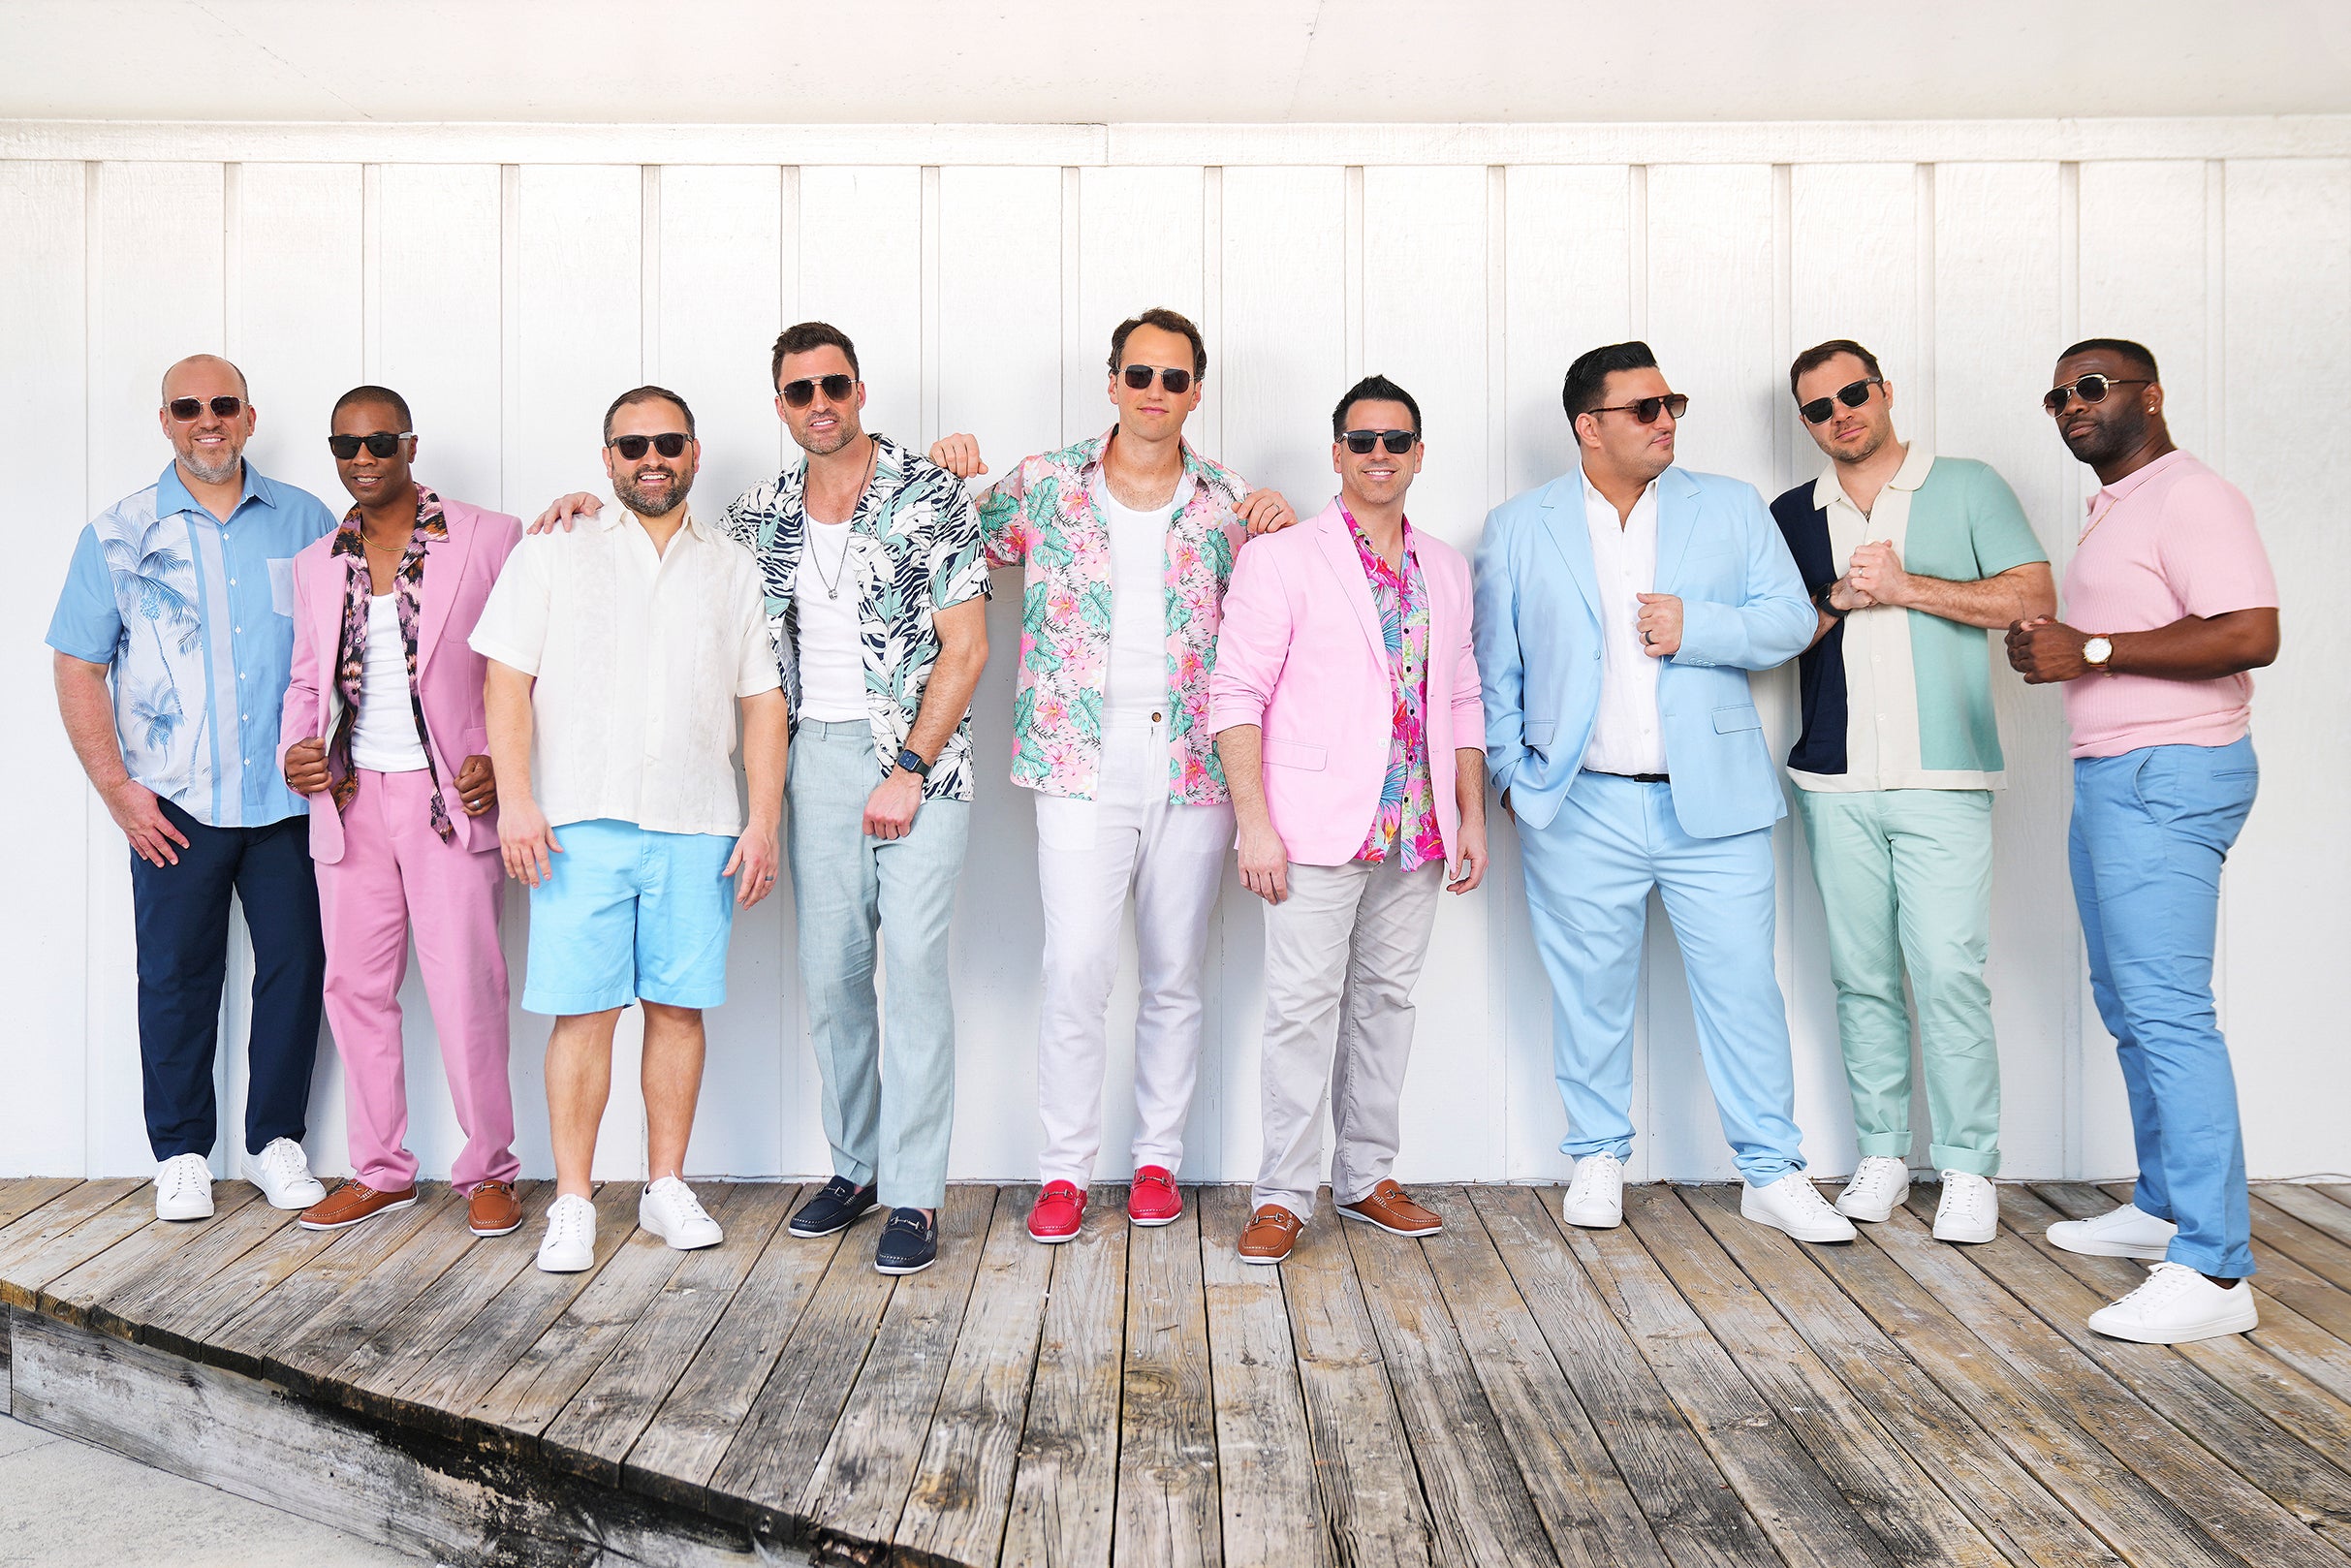 Straight No Chaser free pre-sale c0de for early tickets in Louisville